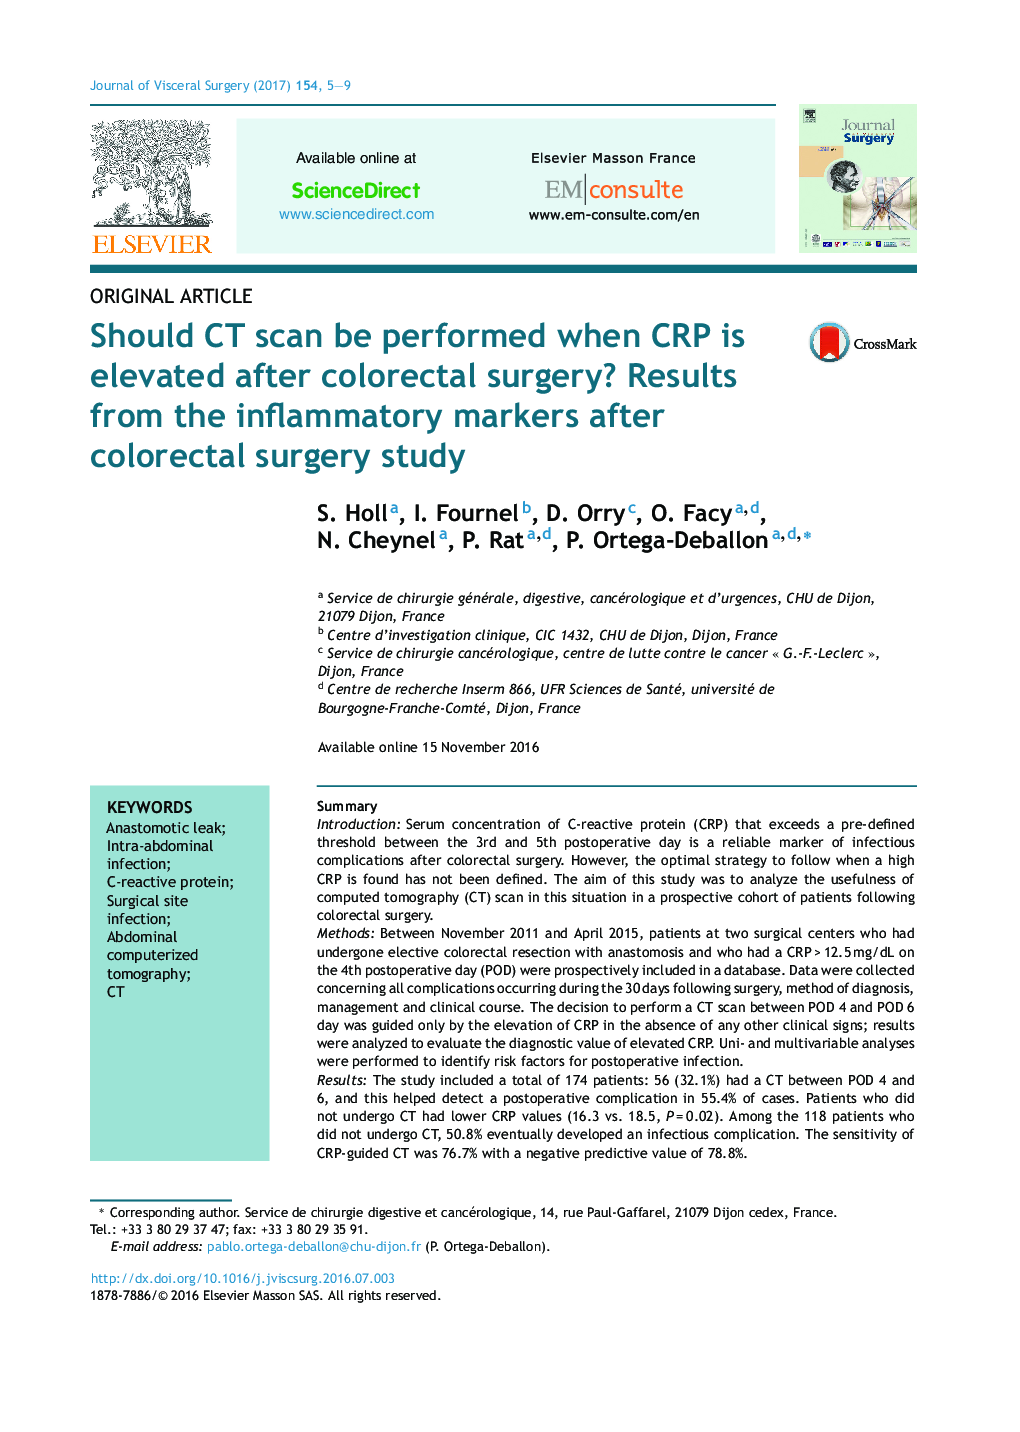 Should CT scan be performed when CRP is elevated after colorectal surgery? Results from the inflammatory markers after colorectal surgery study